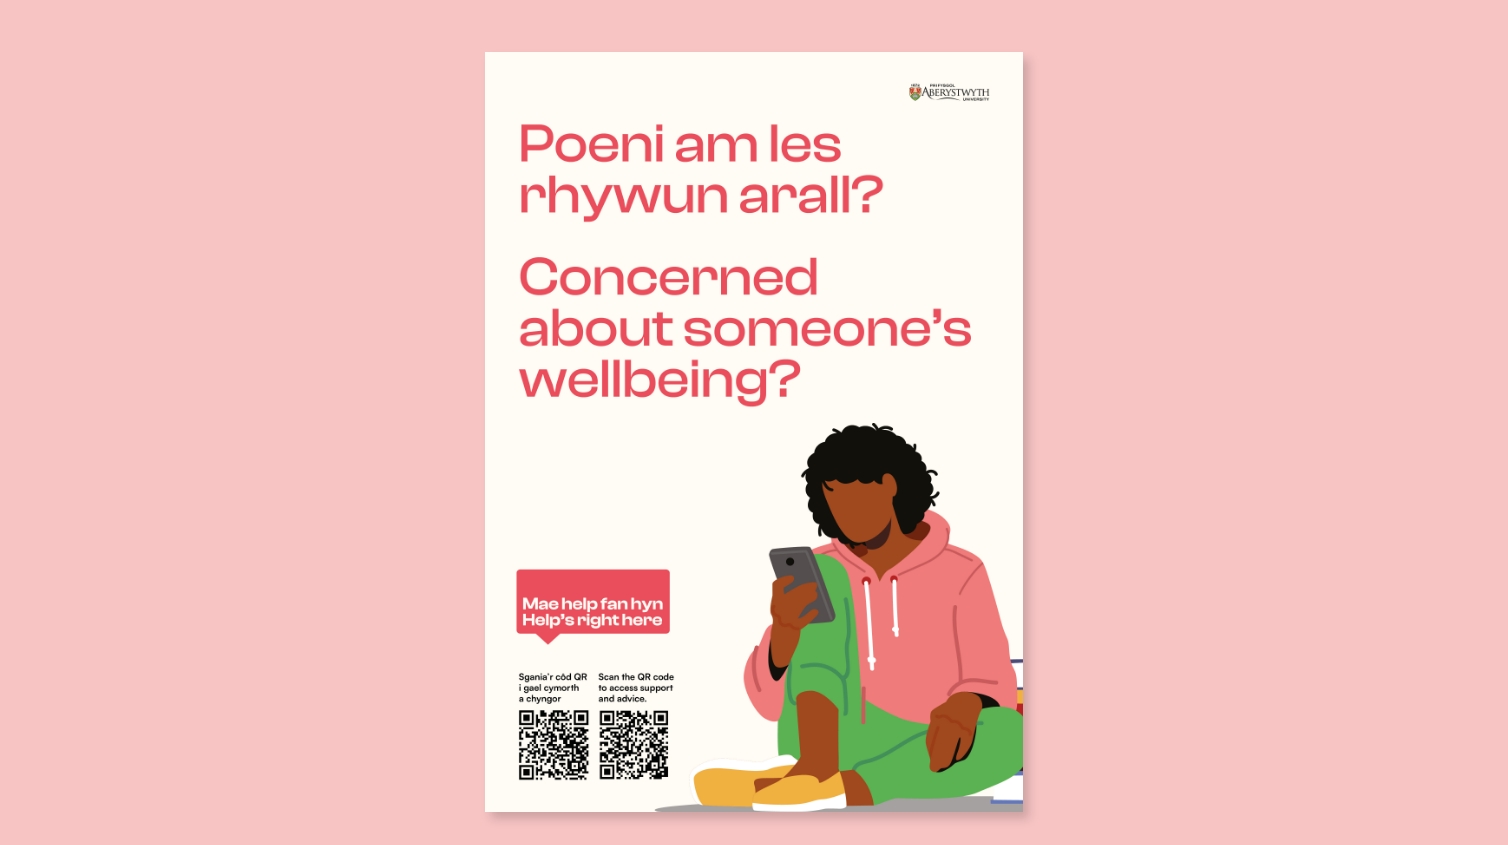 A poster designed by a Brand Agency UK featuring a person sitting cross-legged, using a smartphone, with text asking 